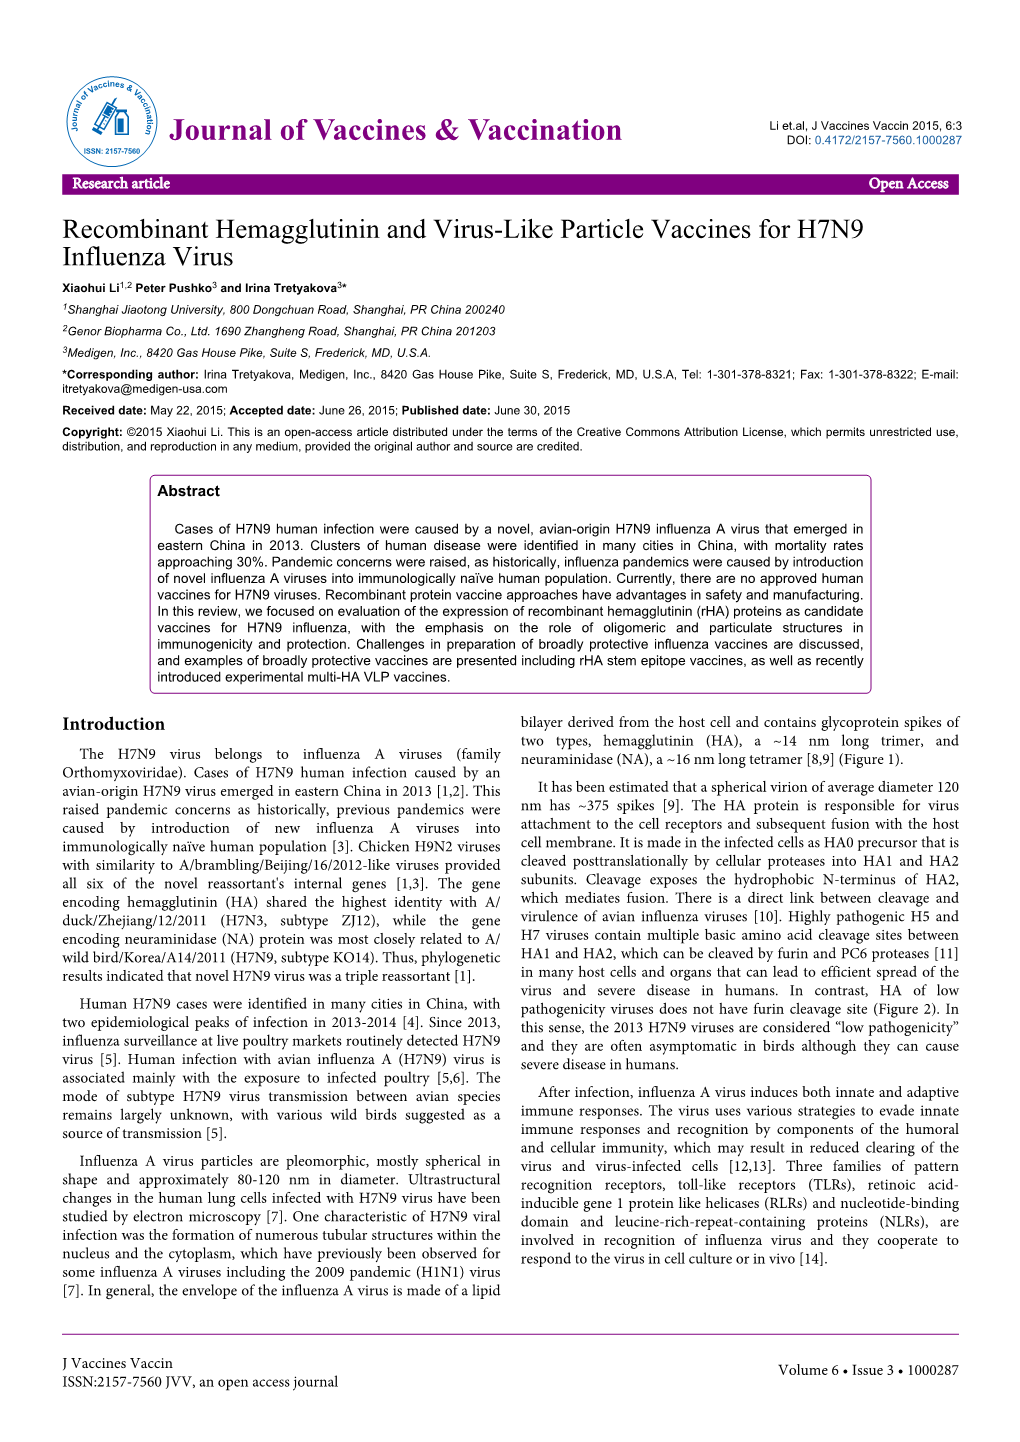 Recombinant Hemagglutinin and Virus-Like Particle Vaccines For